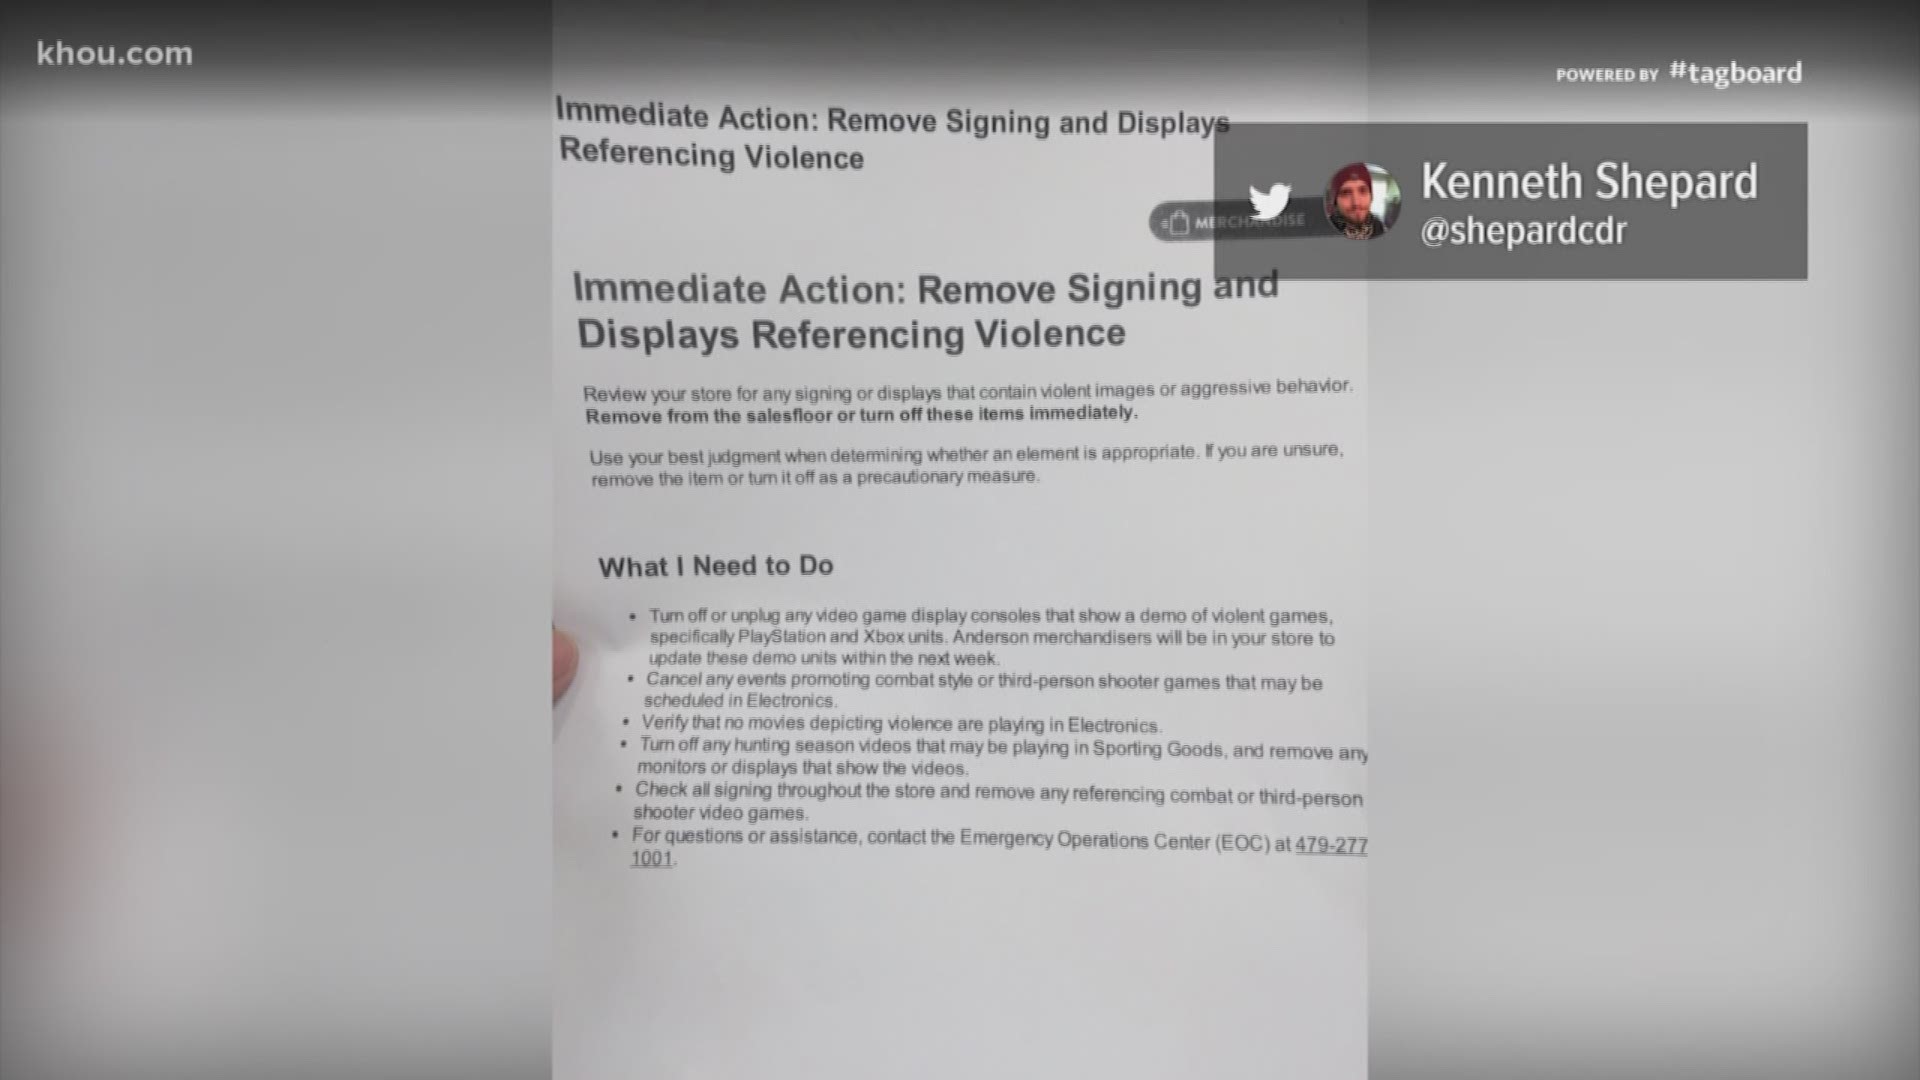 Walmart finds itself right in the middle of the gun control debate in the wake of this weekend's shootings. It started with Kenneth Shepard posting a photo to Twitter. It was of a Walmart memo calling for "immediate action" to remove signs and displays that quote "contain violent themes or aggressive behavior."